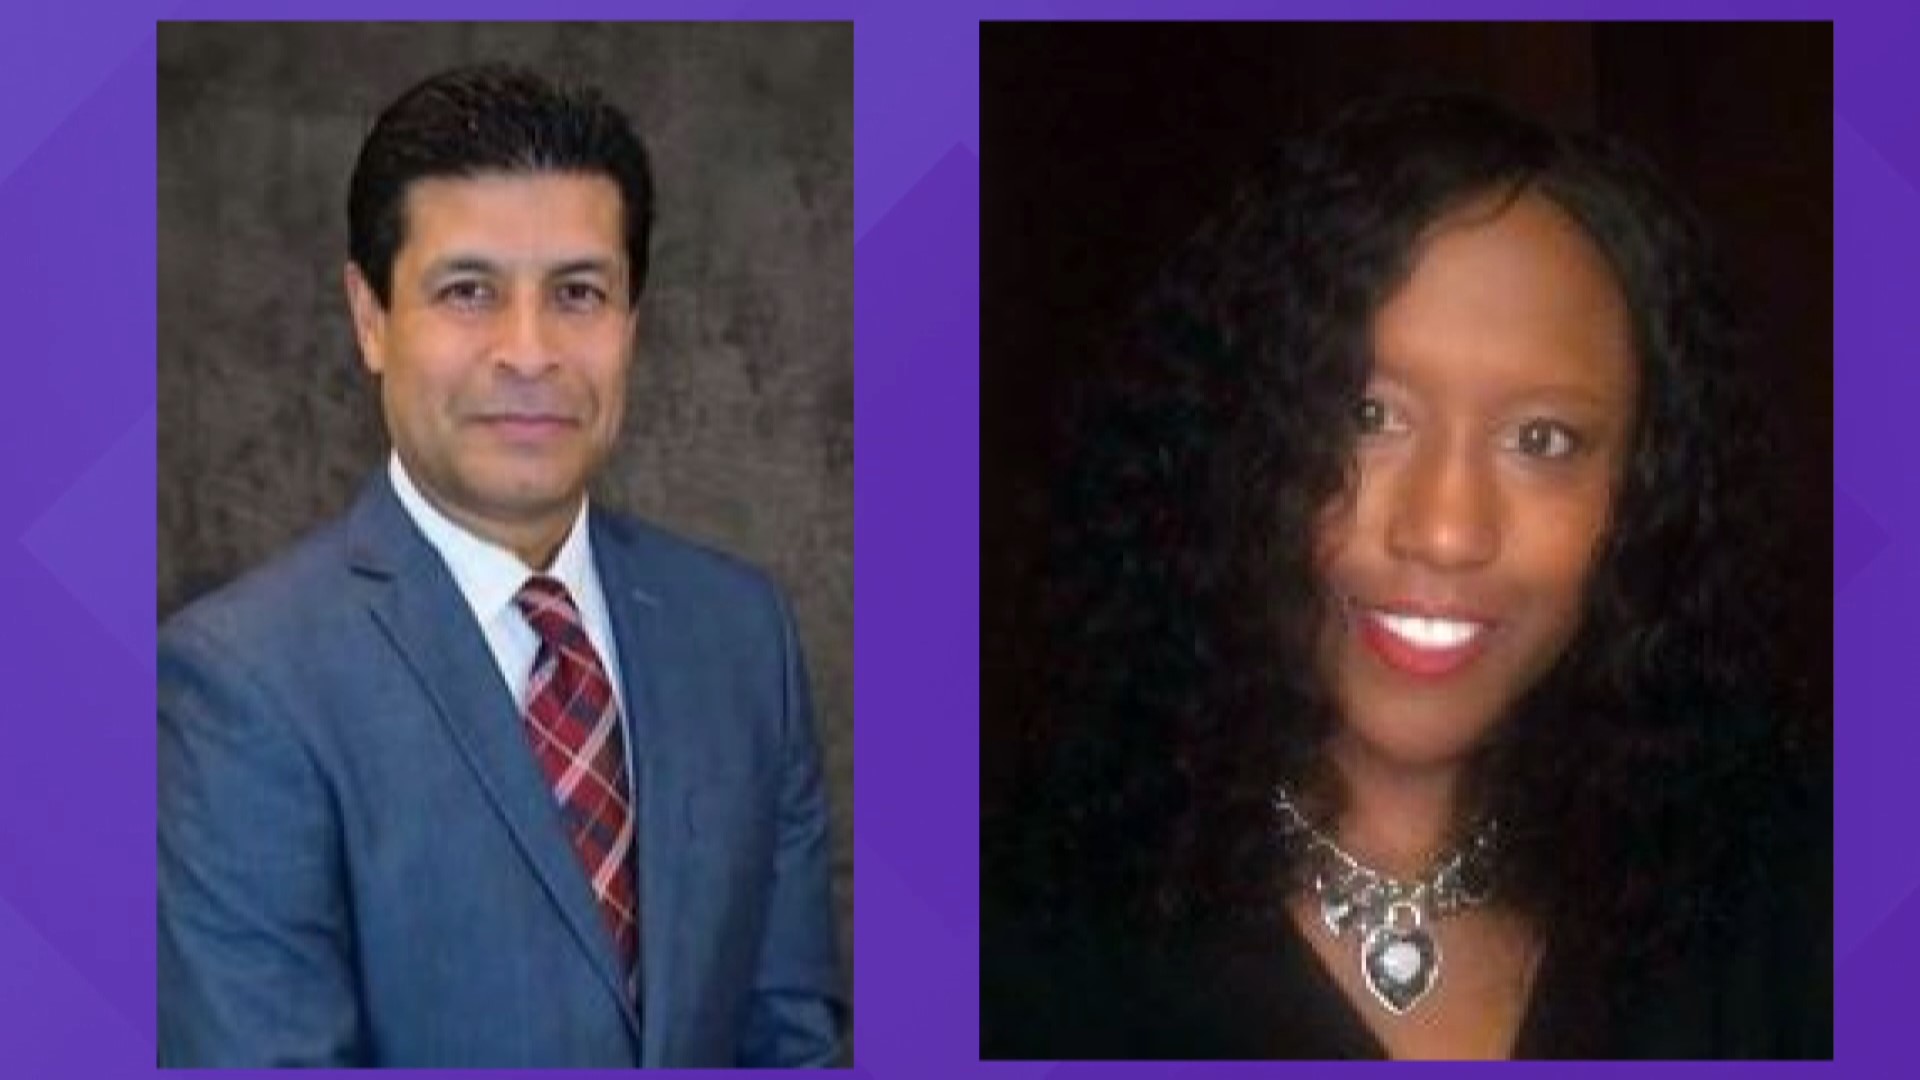 City Manager Michael Marrero and City Attorney Natasha Brooks' employment could be in trouble ahead of Tuesday's city council meeting.